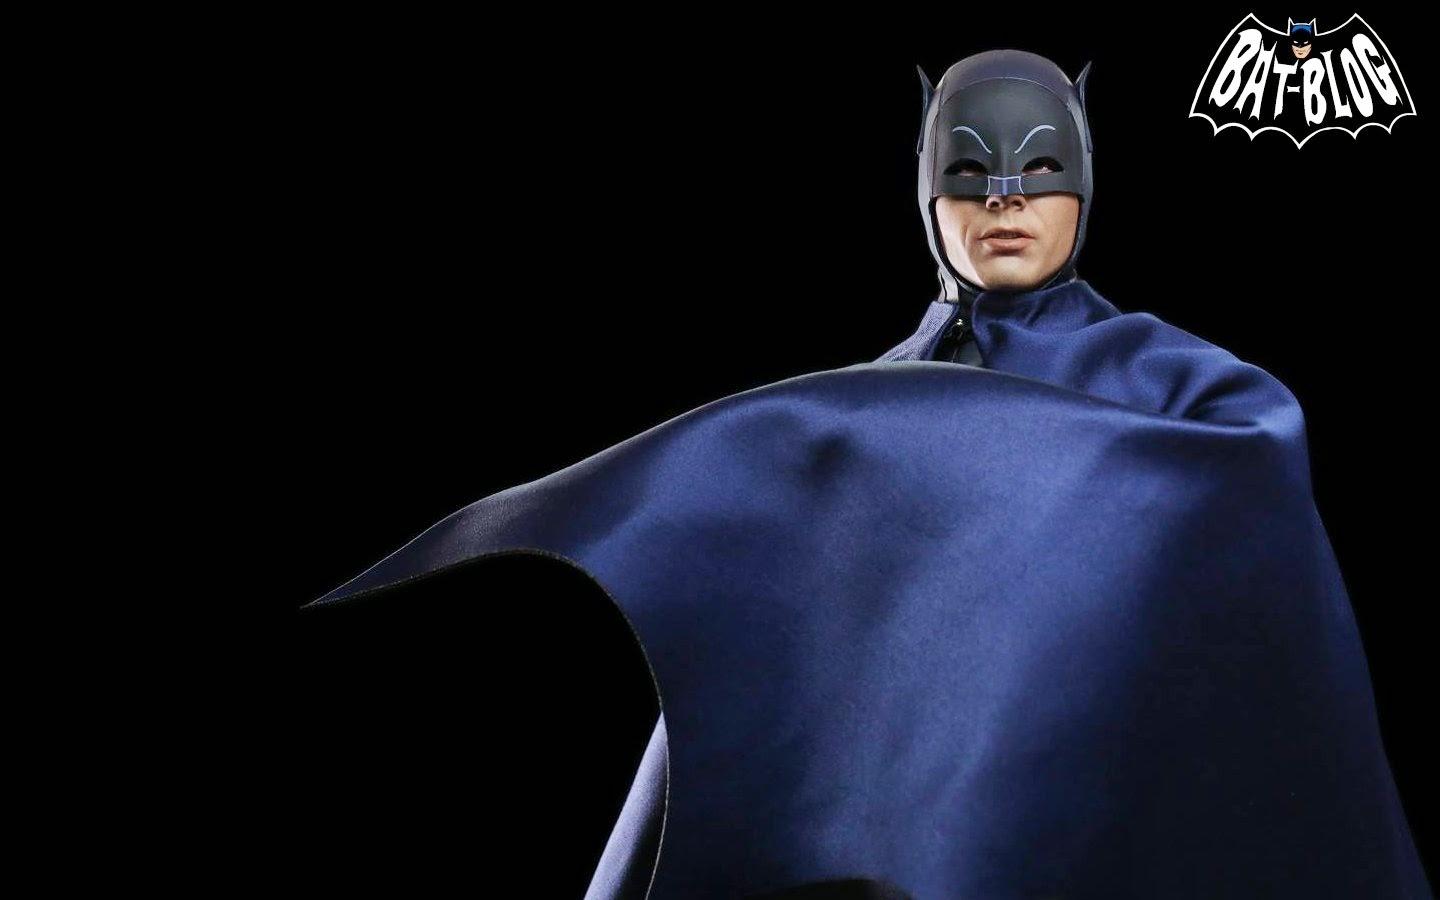 BATMAN WALLPAPERS Based on the HOT TOYS 1966 Adam West Figure